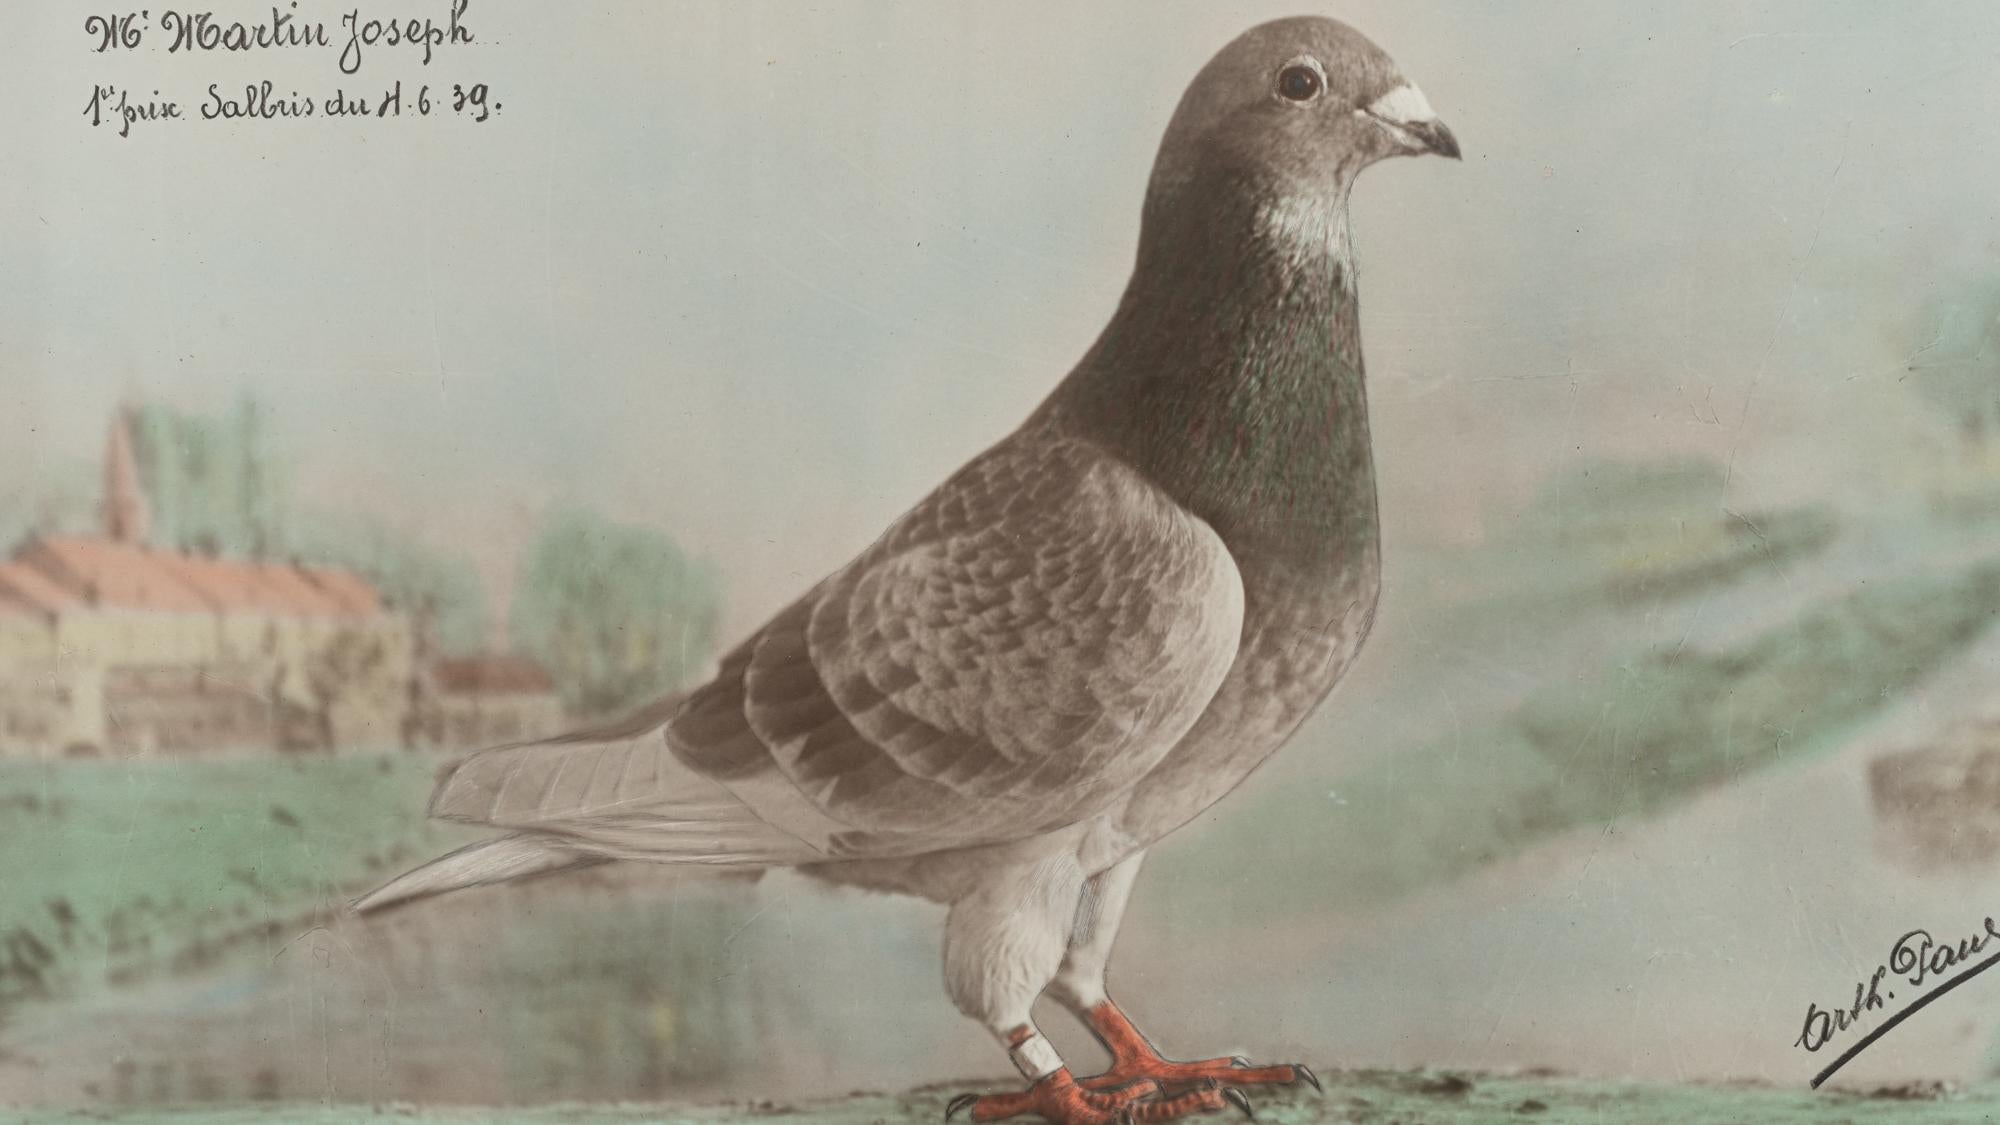 Behold the serene beauty of this 20th Century Belgian artwork, a splendid depiction of nature's simple grace. The central figure, a pigeon, is rendered with lifelike detail and soft, muted colors that capture the viewer's gaze. Set against a